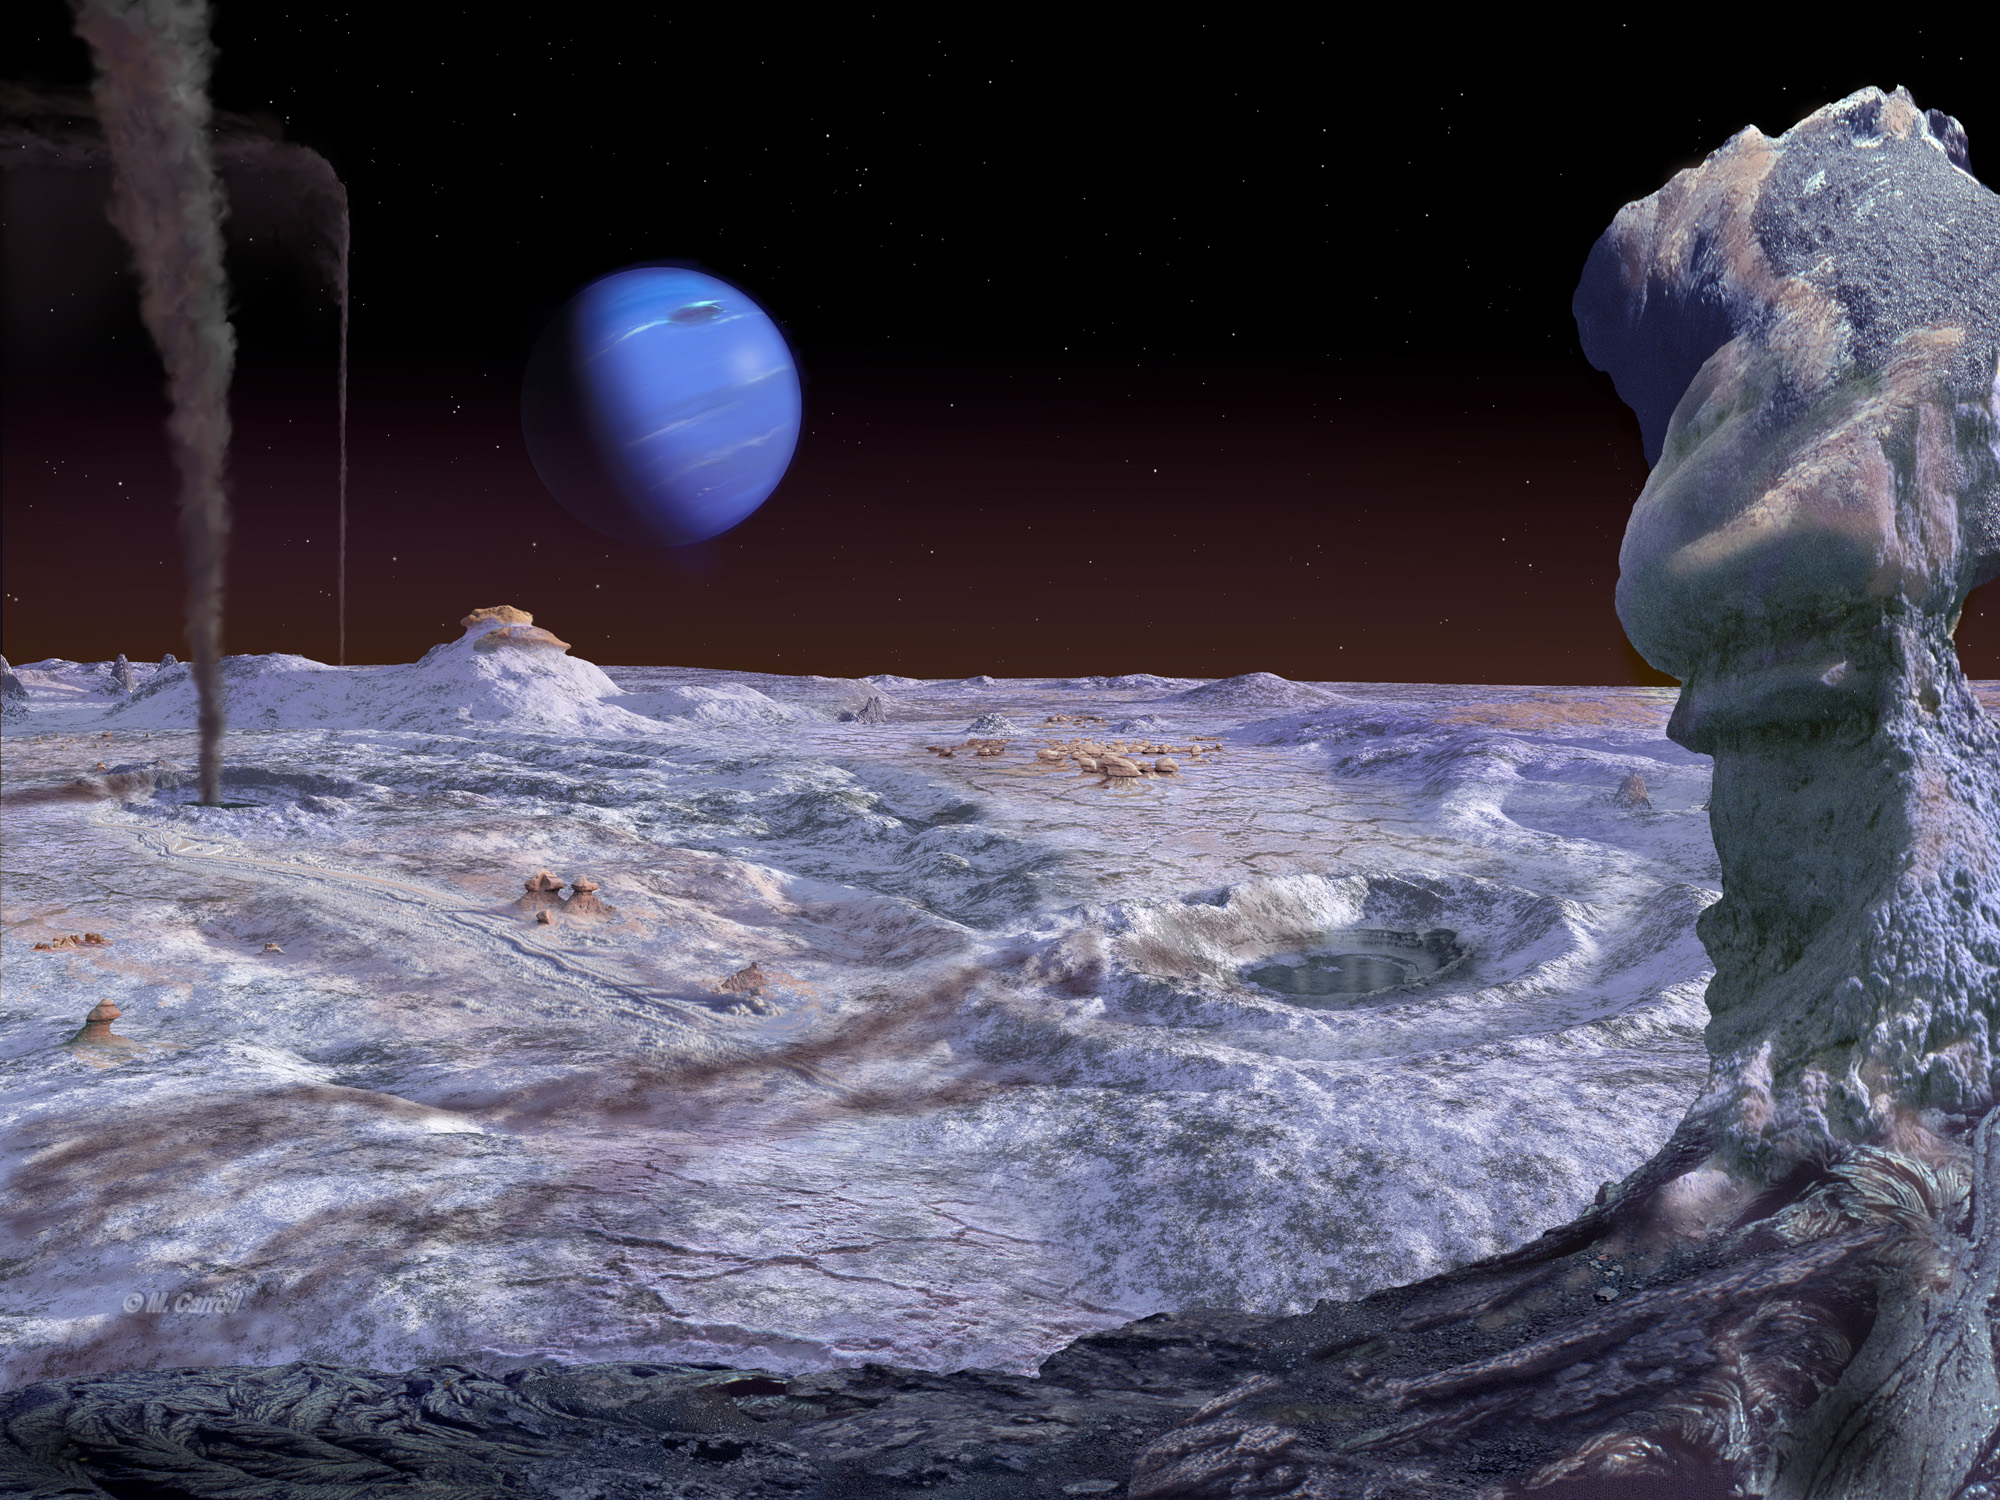 Neptune's moon Triton has nitrogen ice, which could have a pinkish tinge. Carroll created this image before his trip to Antarctica, but he says his observations could help with future depictions of the moon. 